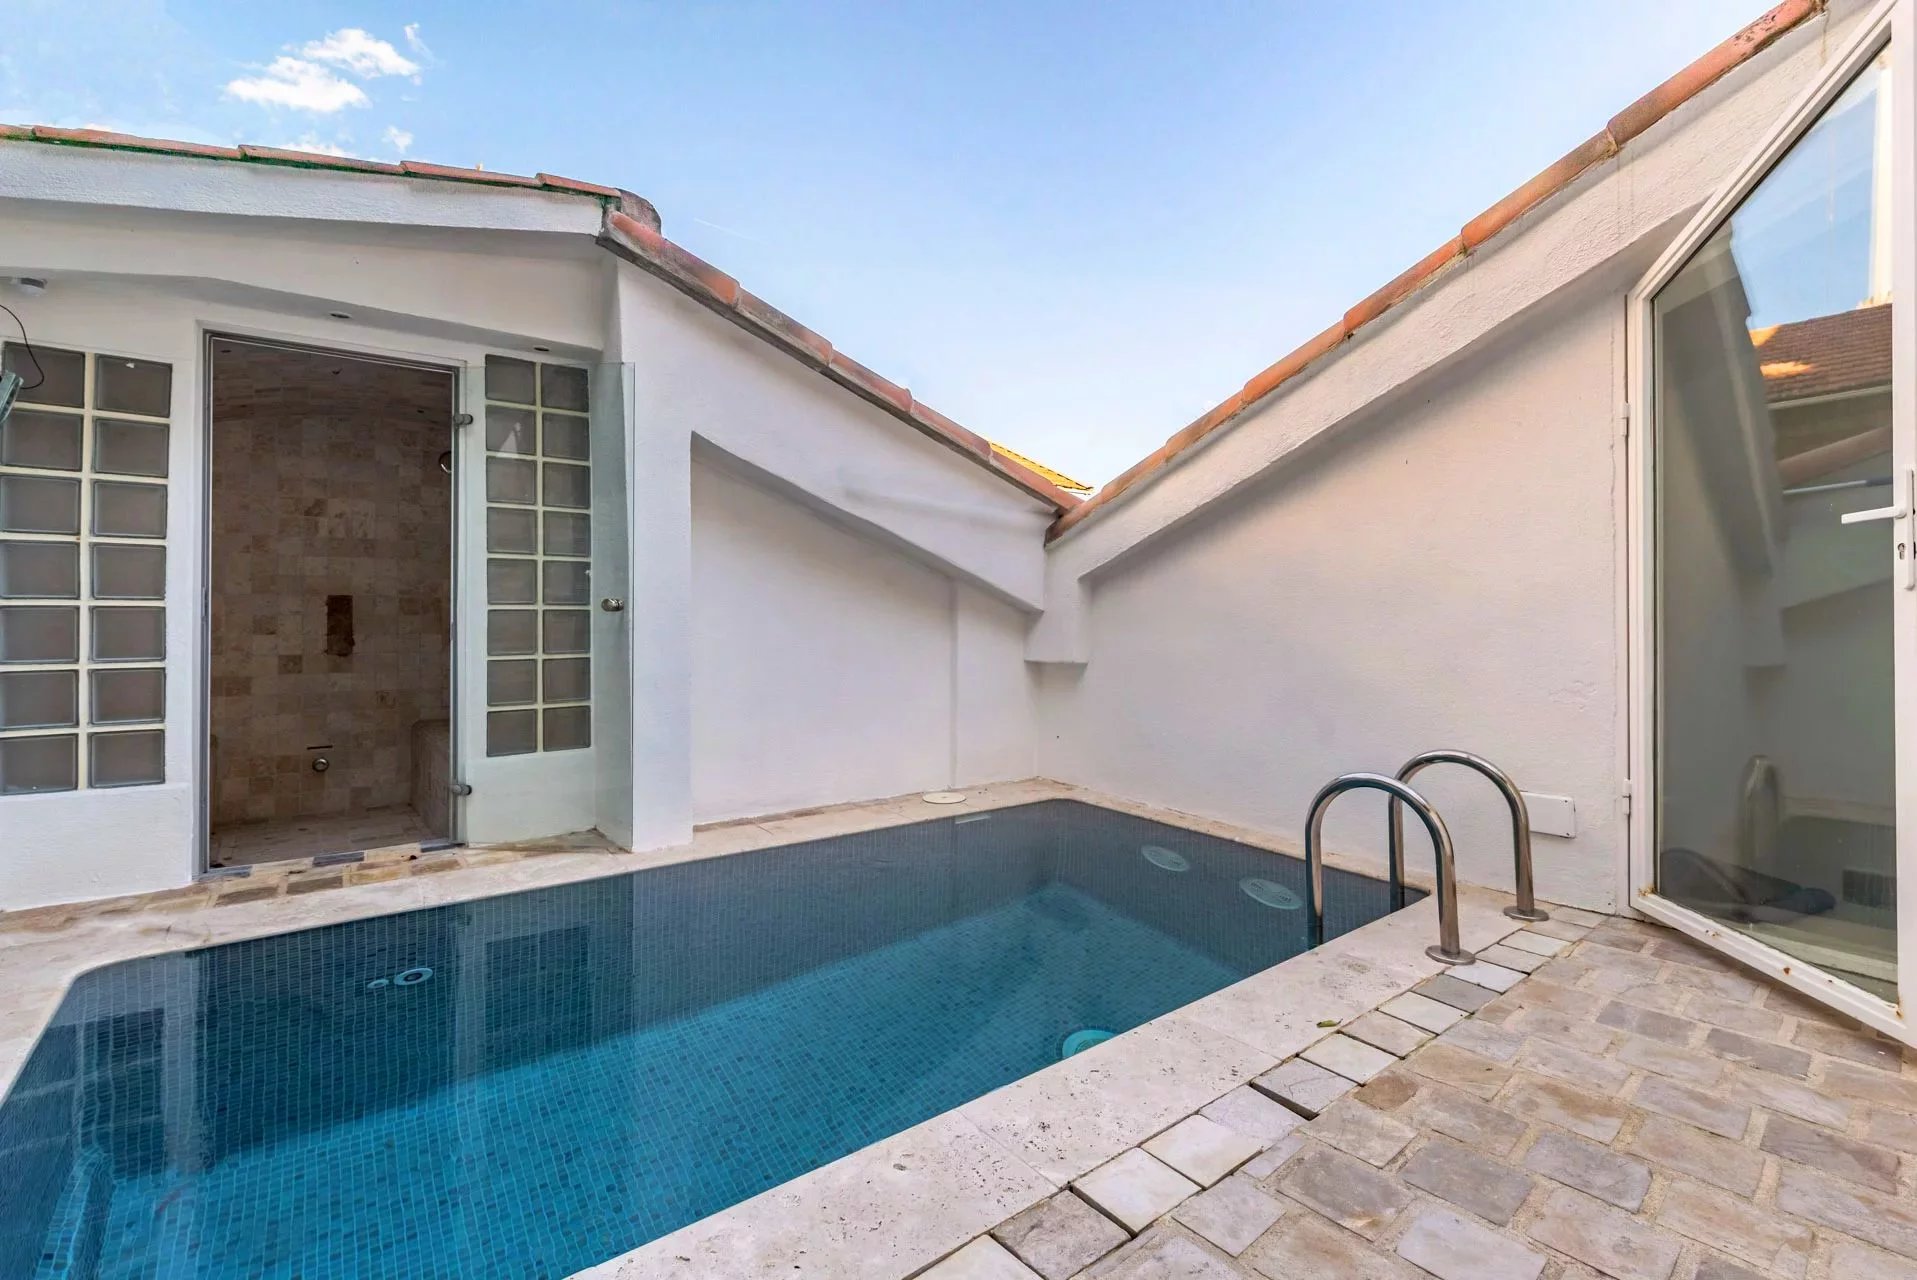 CANNES FOR SALE 5 ROOM TOWNHOUSE LOFT STYLE WITH POOL AND SAUNA